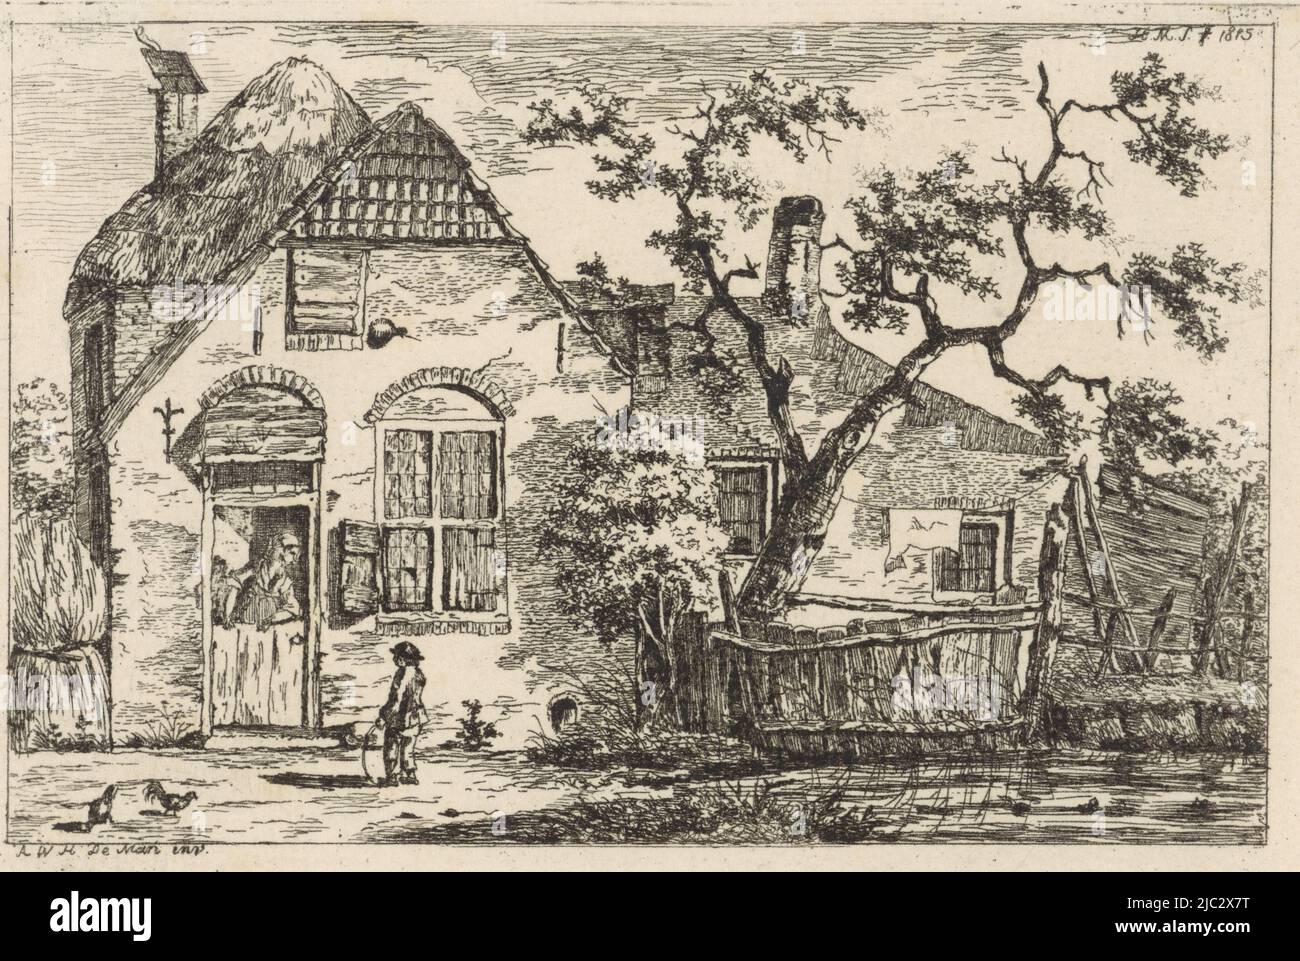 A boy with a hoop in his hand stands near a farmhouse. A woman looks out through the door. Laundry is hanging to dry on a clothesline., Boy with hoop near a farmhouse, print maker: Hendrik Marcus Schouten, (mentioned on object), intermediary draughtsman: A.W.H. de Mari, (mentioned on object), 1815, paper, etching, h 97 mm × w 139 mm Stock Photo